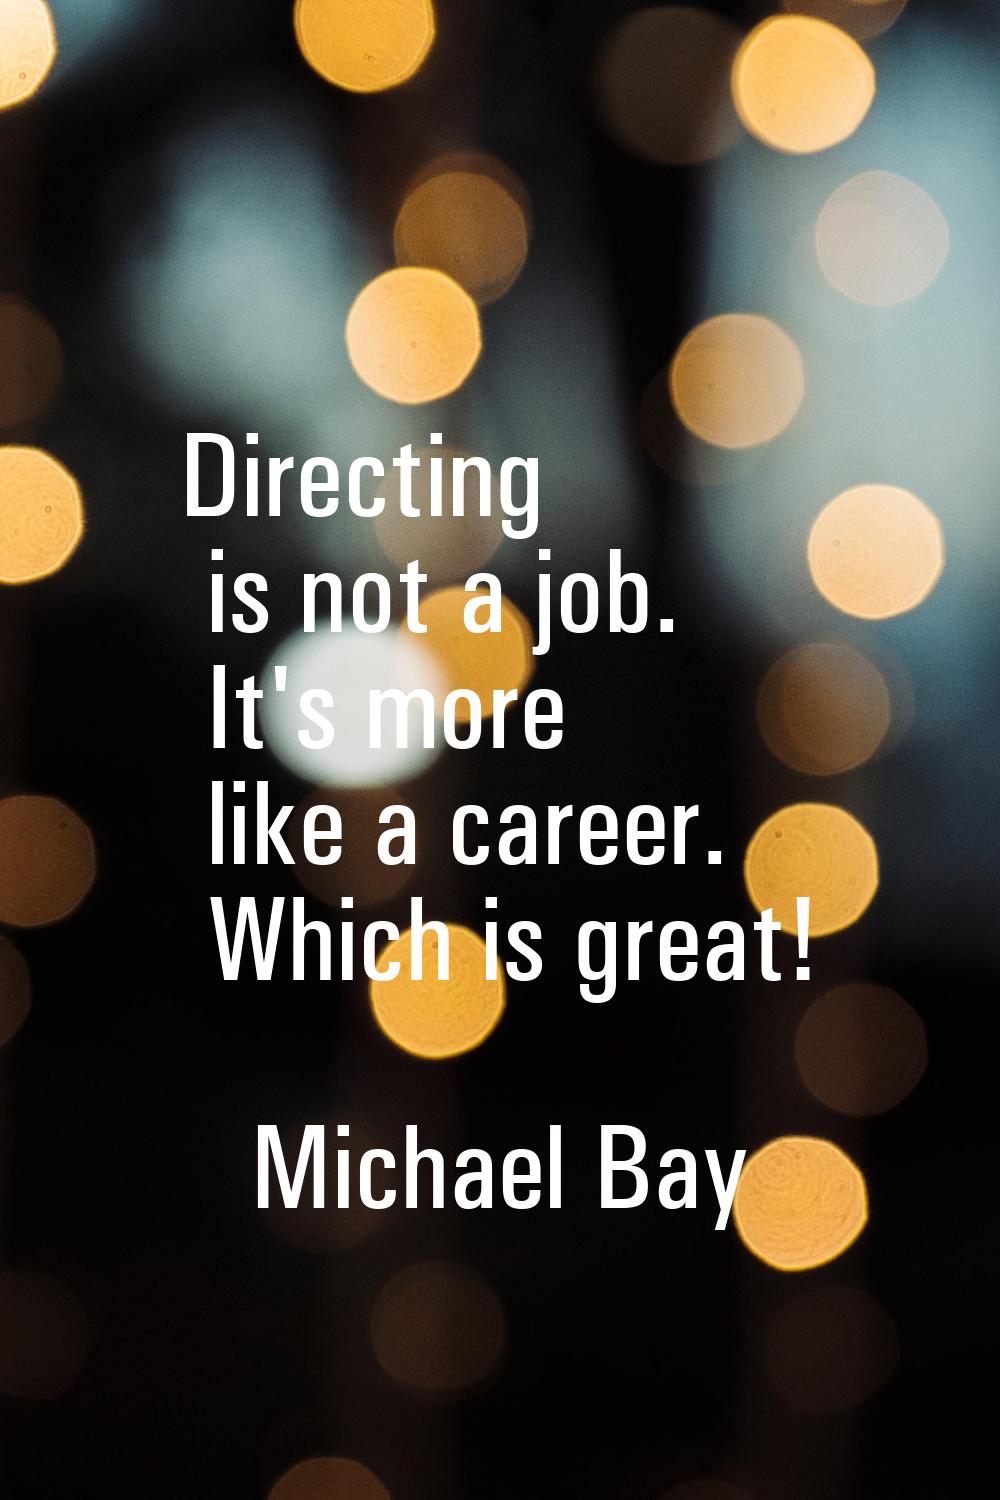 Directing is not a job. It's more like a career. Which is great!